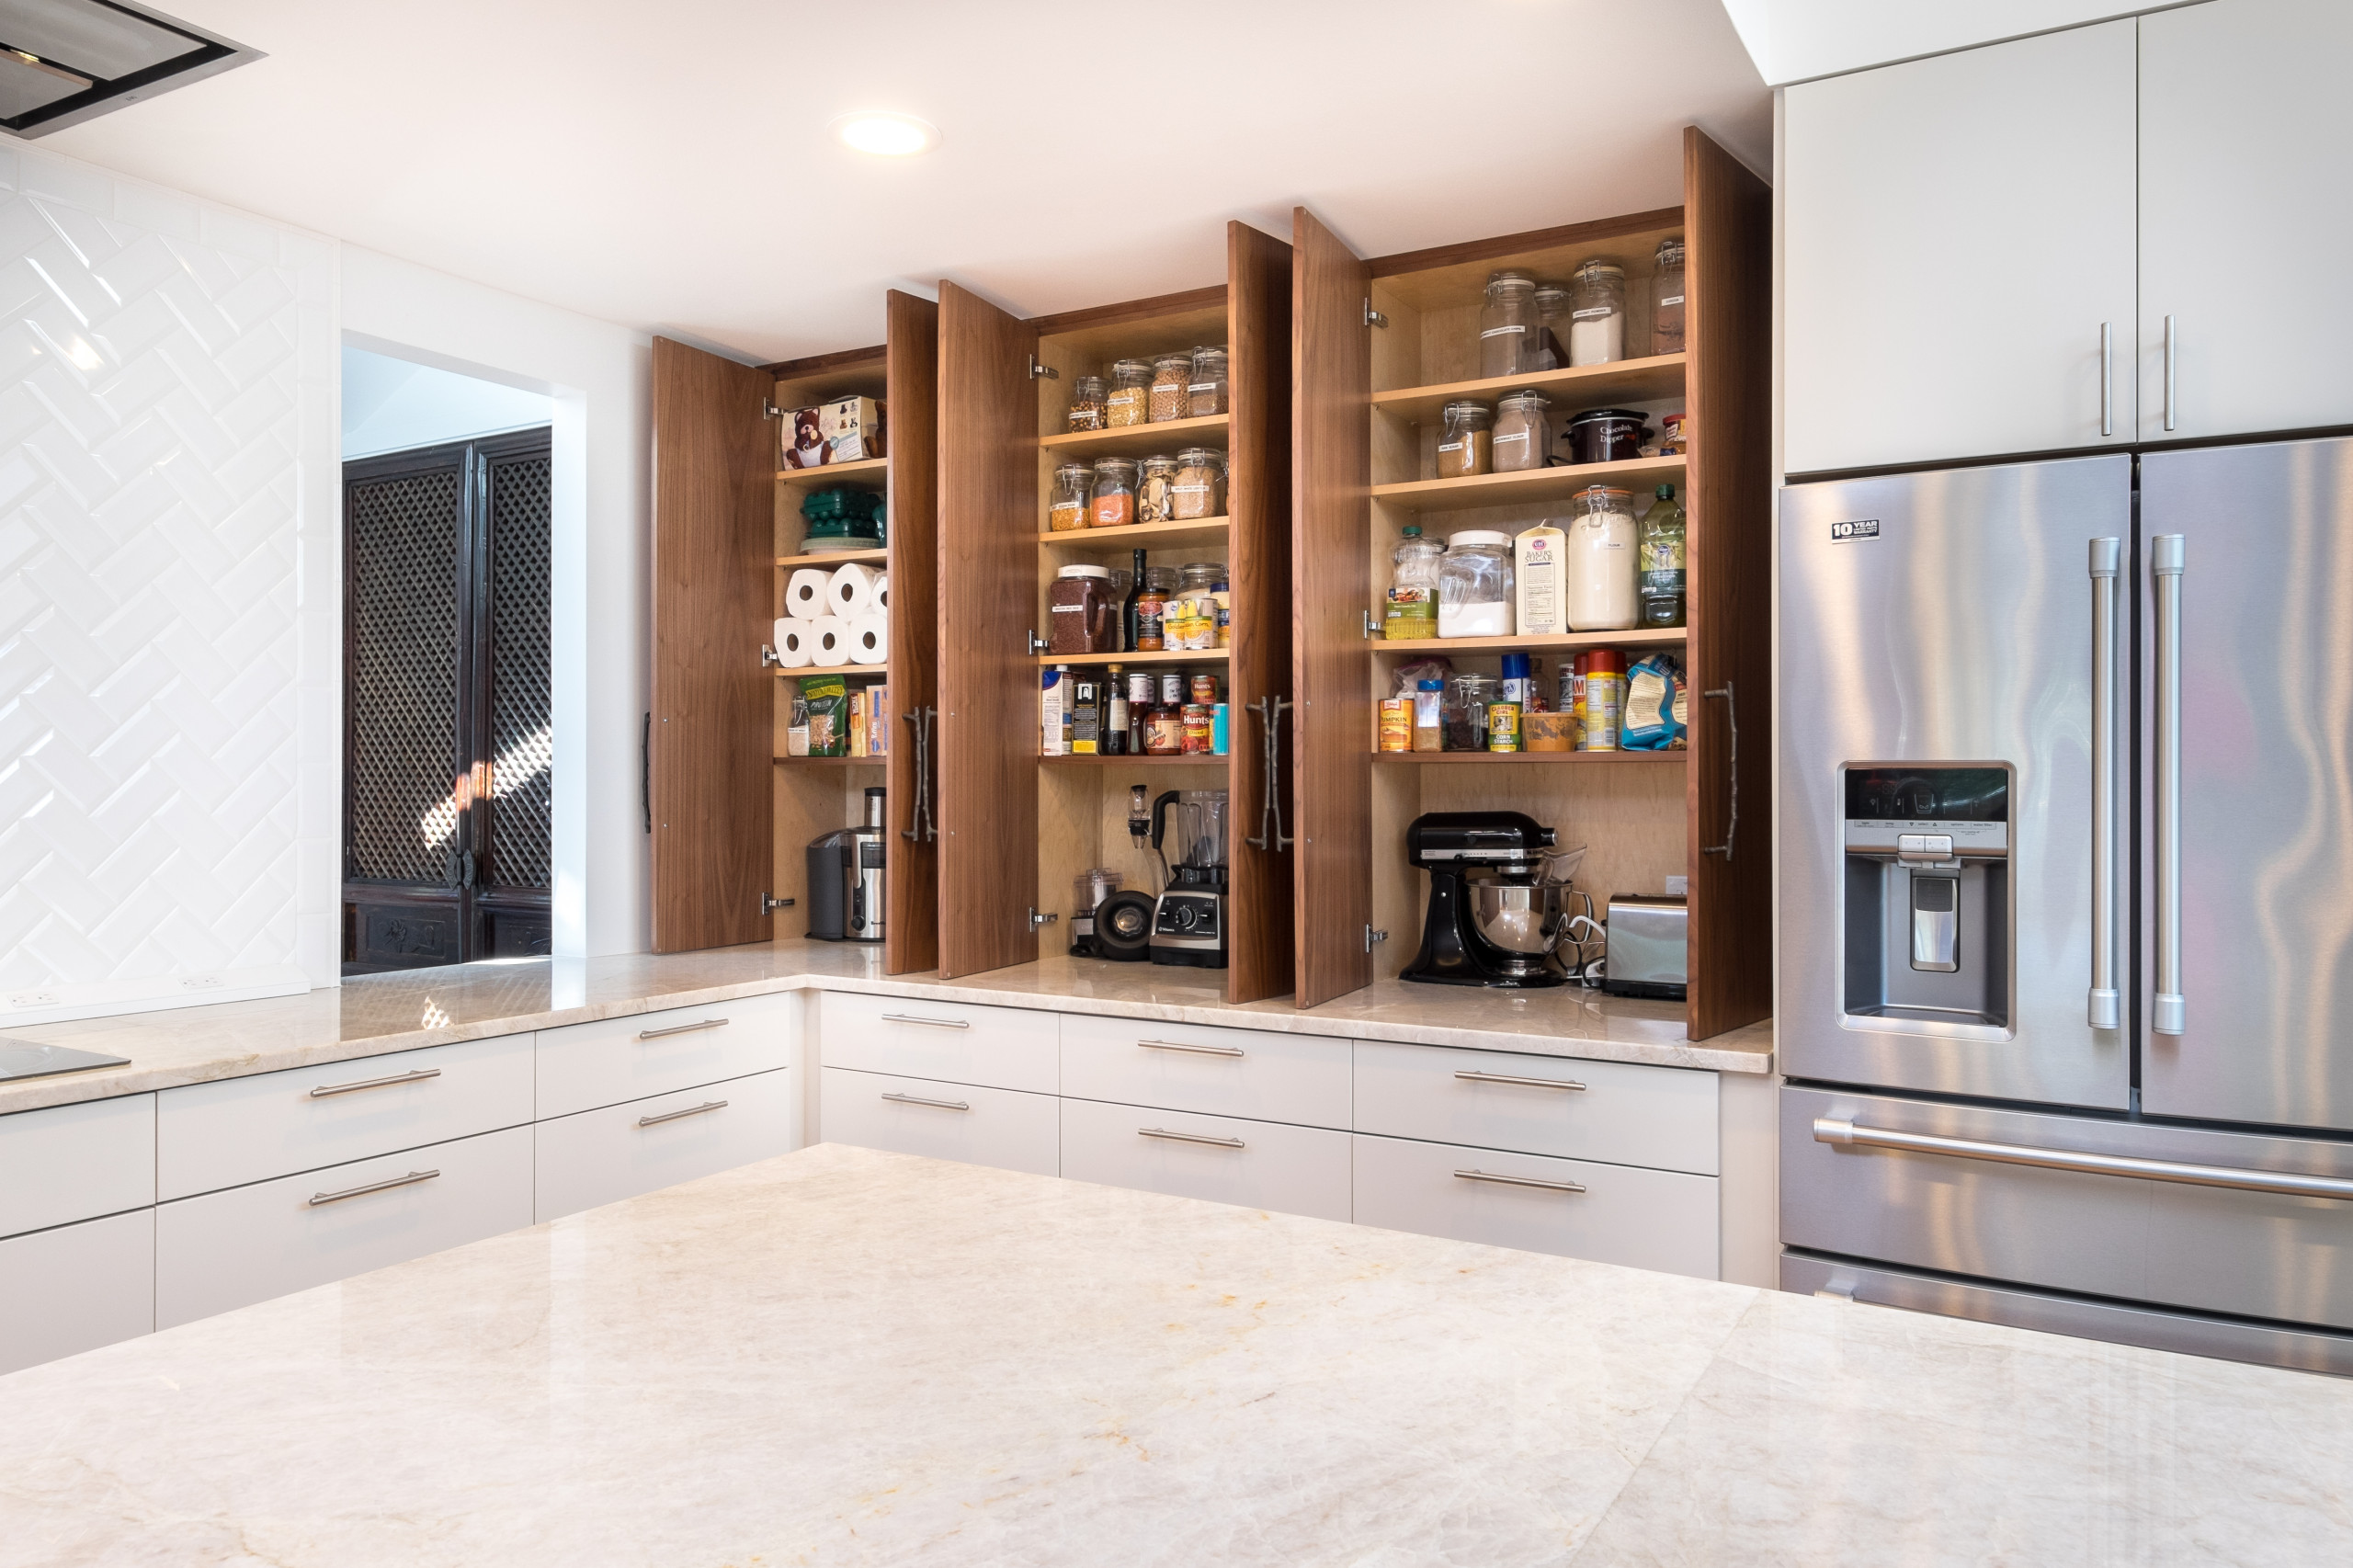 https://st.hzcdn.com/simgs/pictures/kitchens/counter-pantry-with-appliance-storage-advantage-services-construction-img~9be120300755f429_14-7904-1-e46d436.jpg